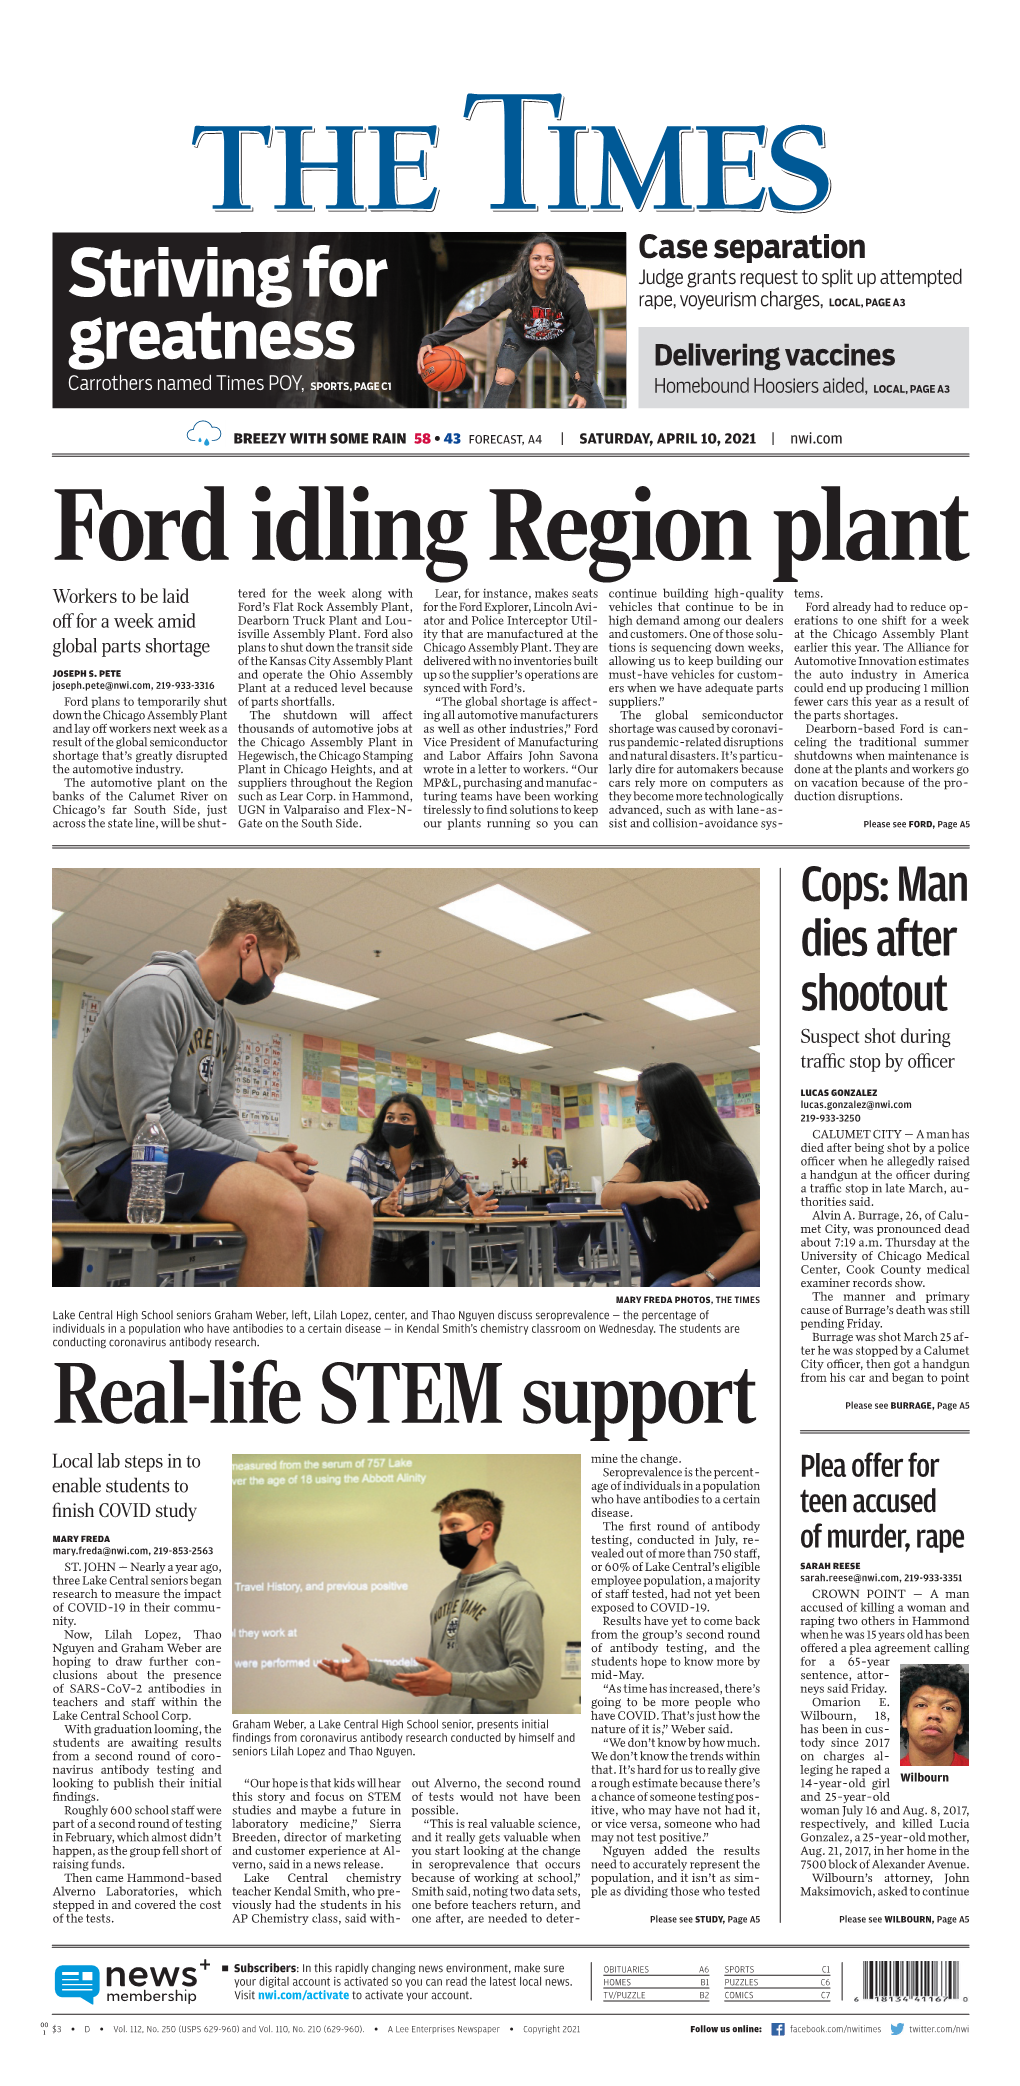 NWI Times – Real Life STEM Support